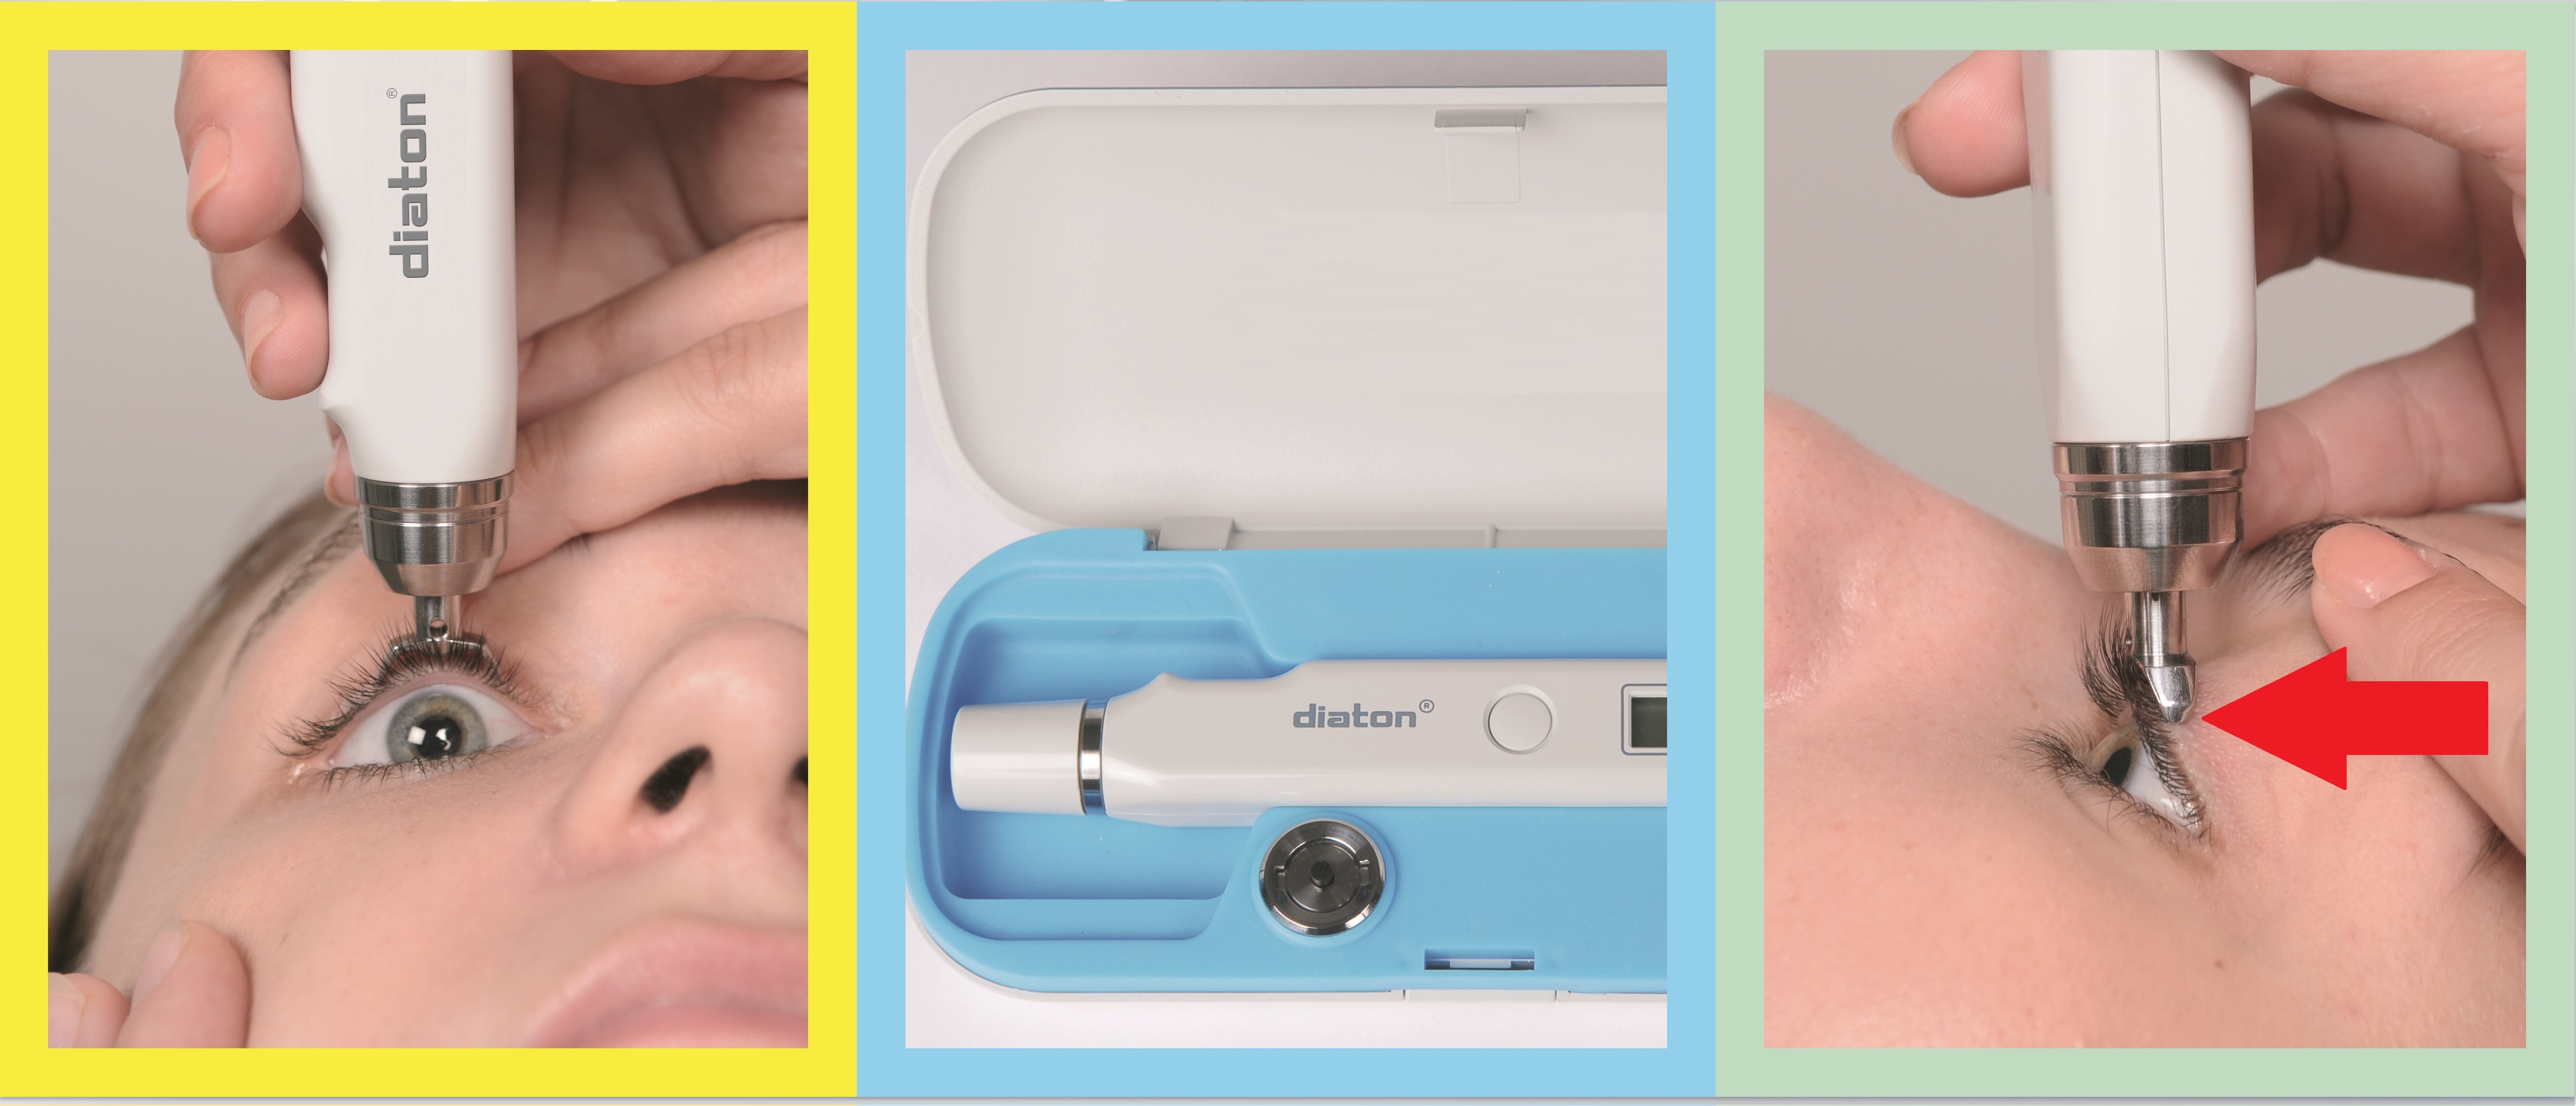 Looking for a perfect tonometer? Here are your options and brands: